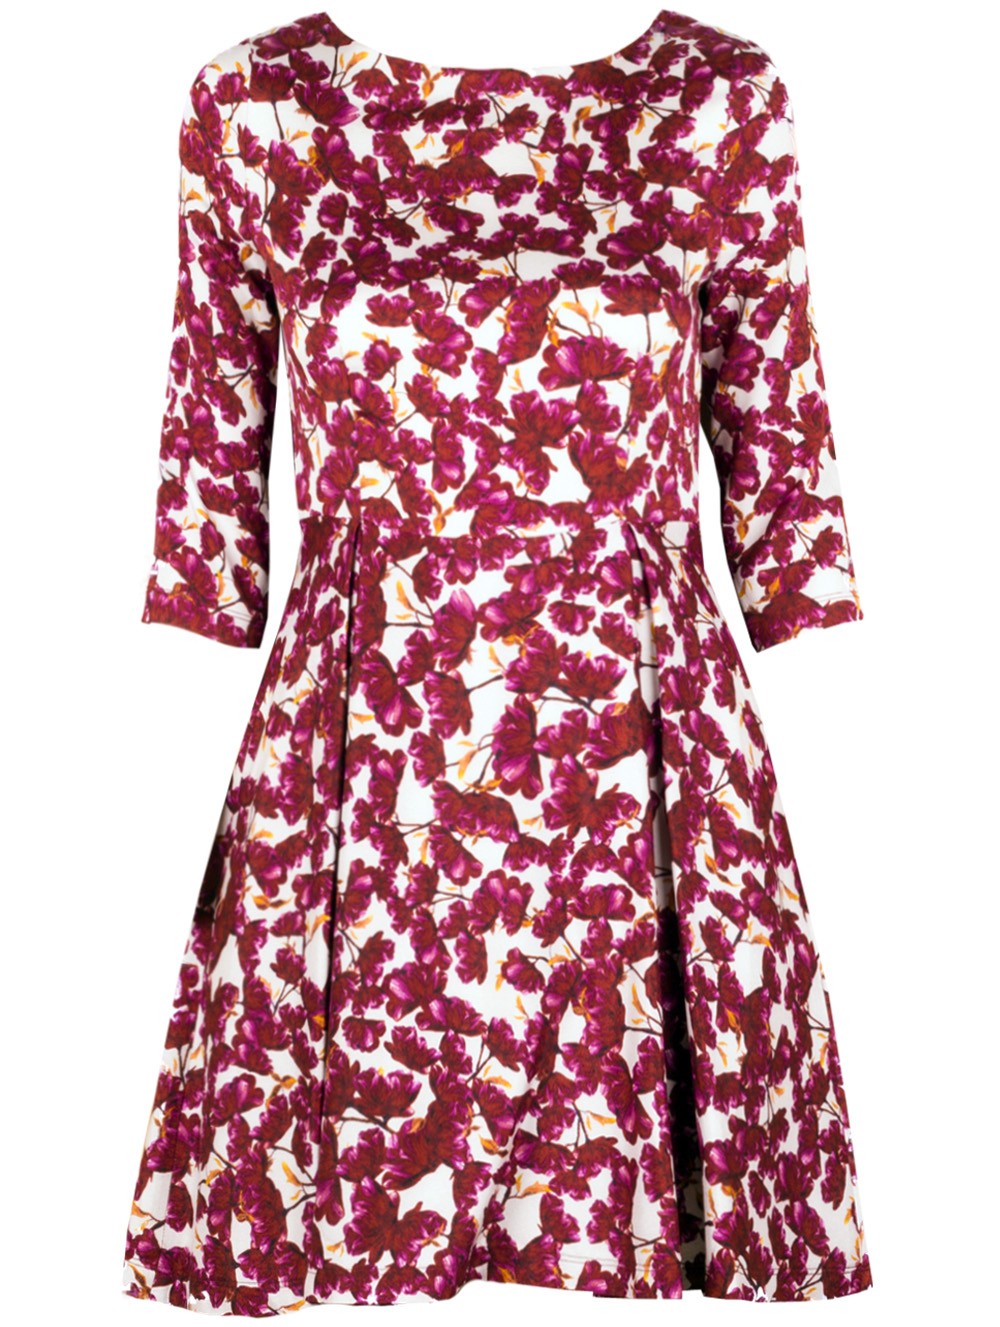 Most Wanted: Suno Flared Floral Dress - Interview Magazine